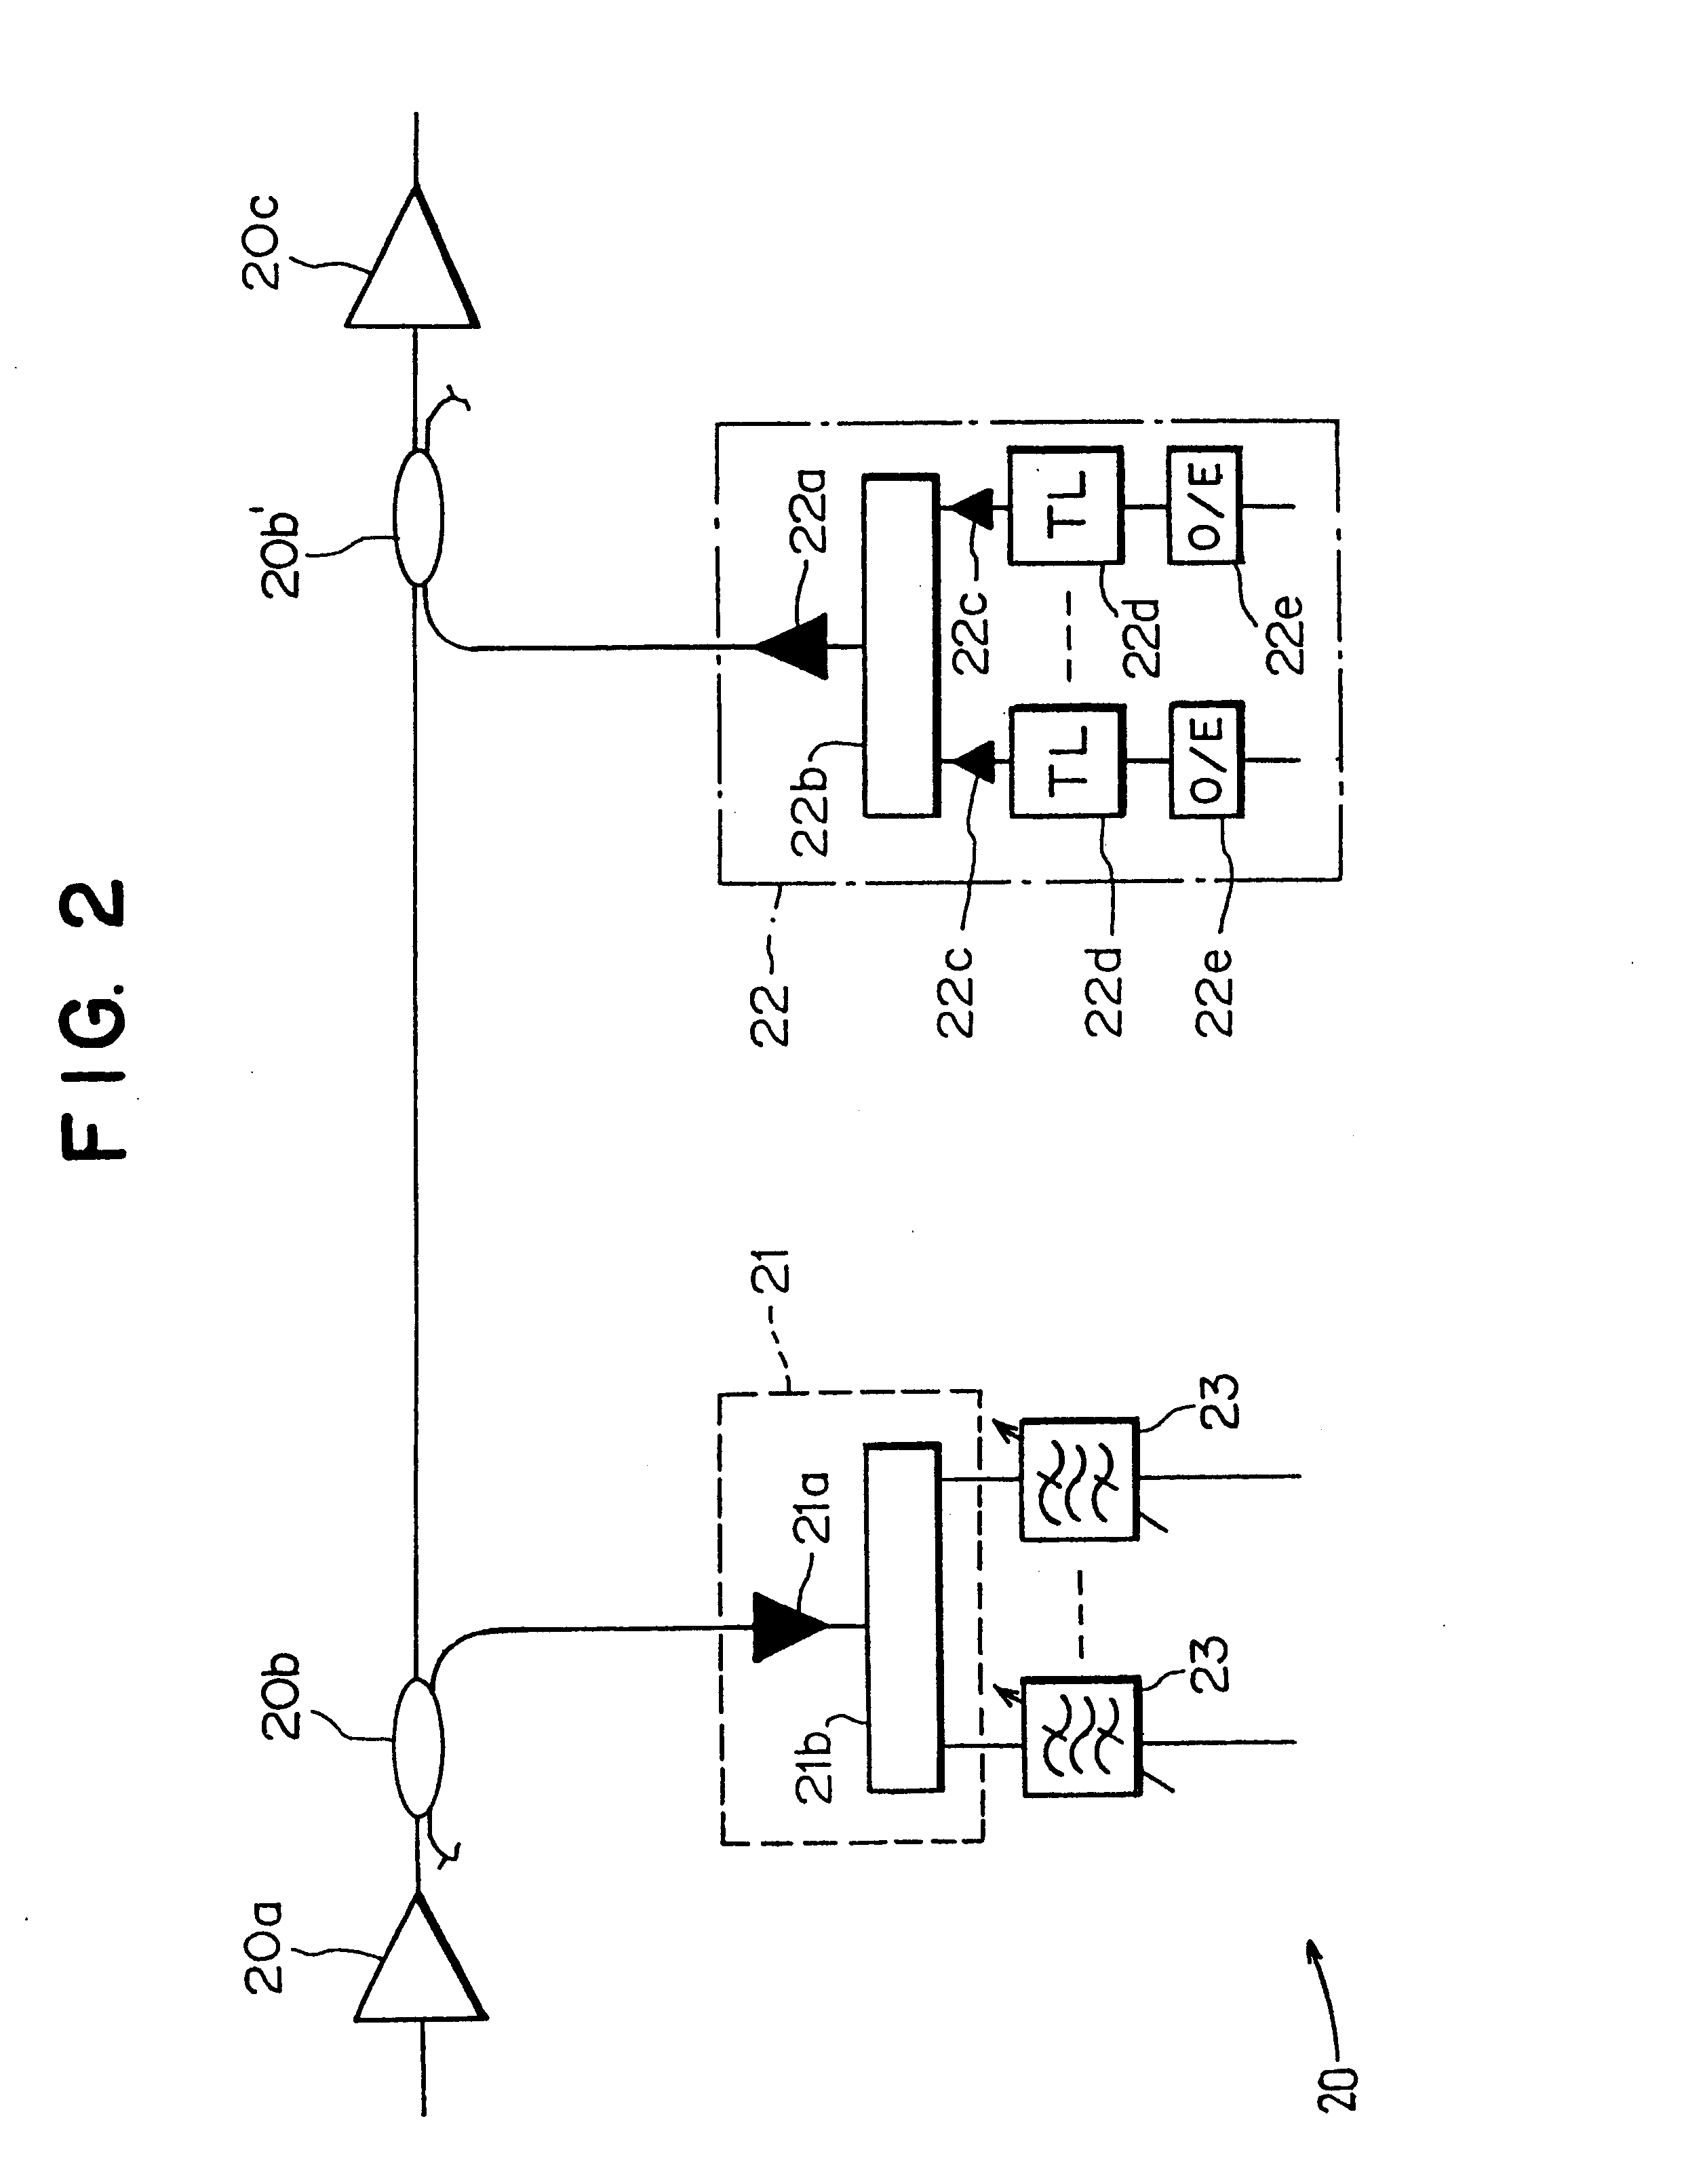 Wavelength-multiplexed light amplifying apparatus, optical amplifier and optical add-and-drop apparatus using wavelength-multiplexed light amplifying basic unit